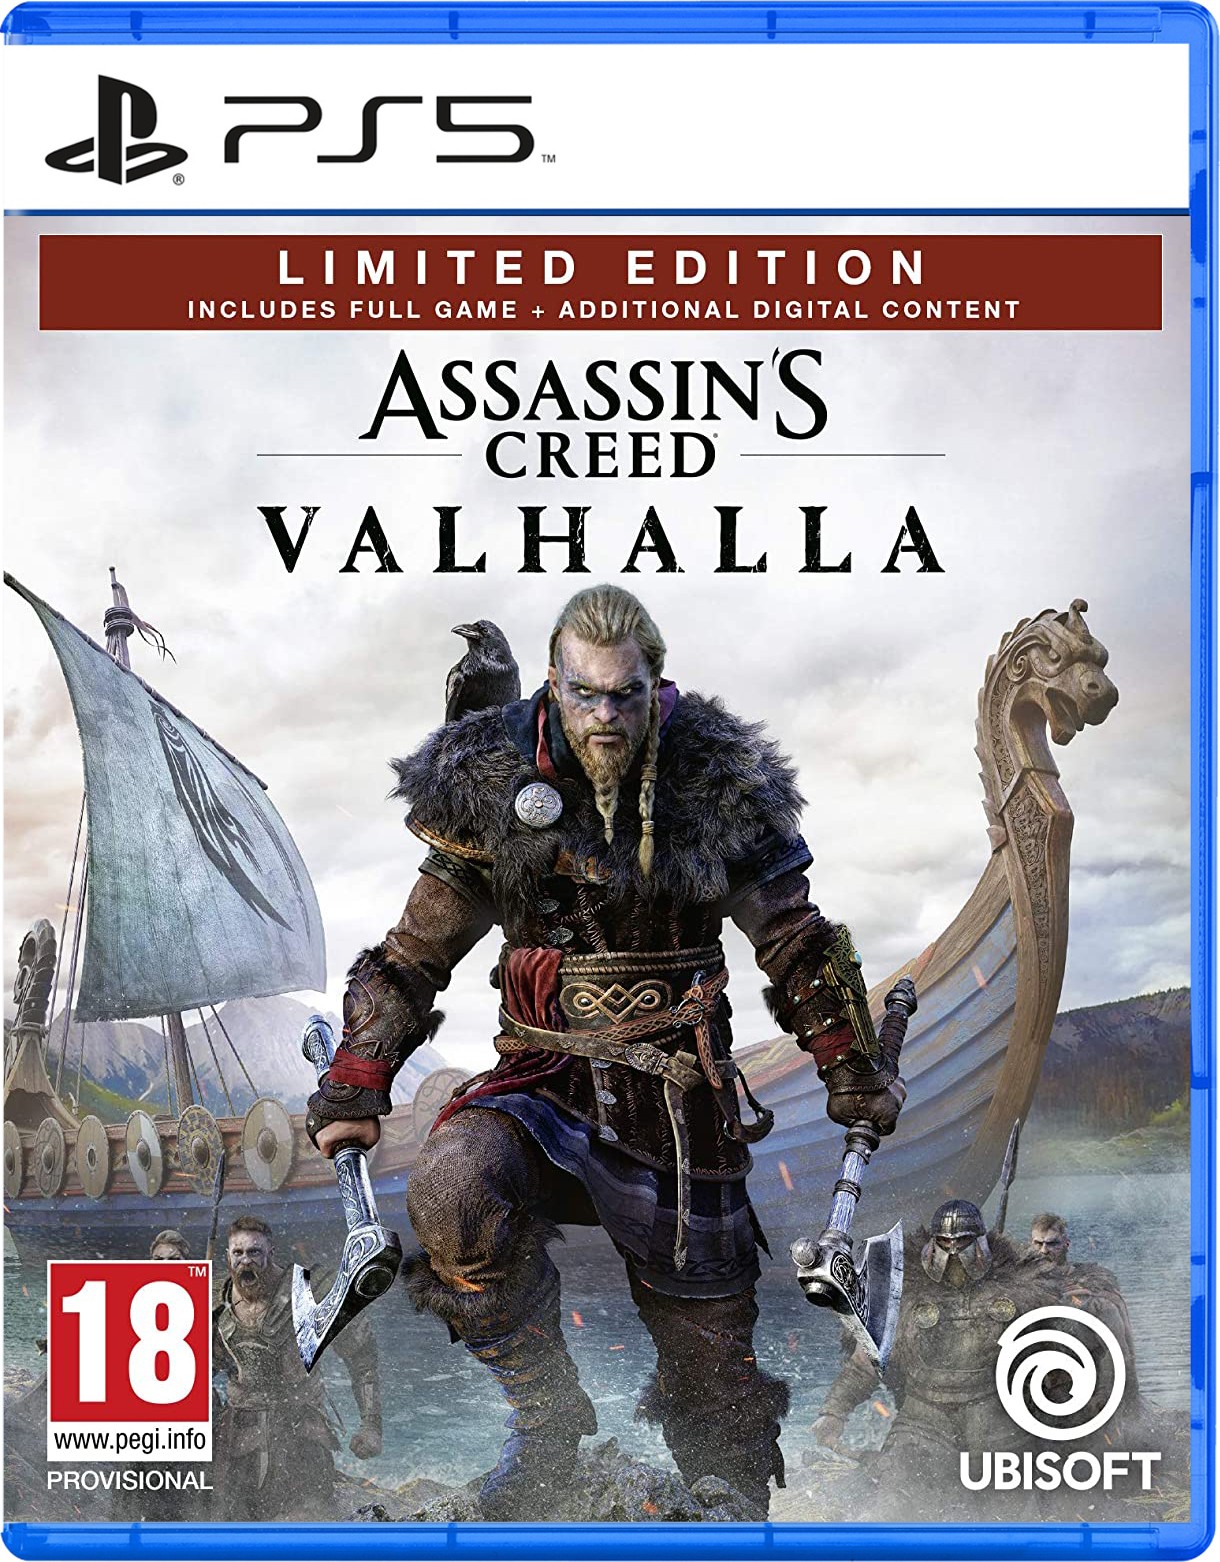 Assassin's Creed Valhalla, Assassin's Creed, Ubisoft, PlayStation 5, PS5, release date, gameplay, features, price, Asia, trailer, Limited Edition, Gold Edition, Ultimate Edition, Multi-Language